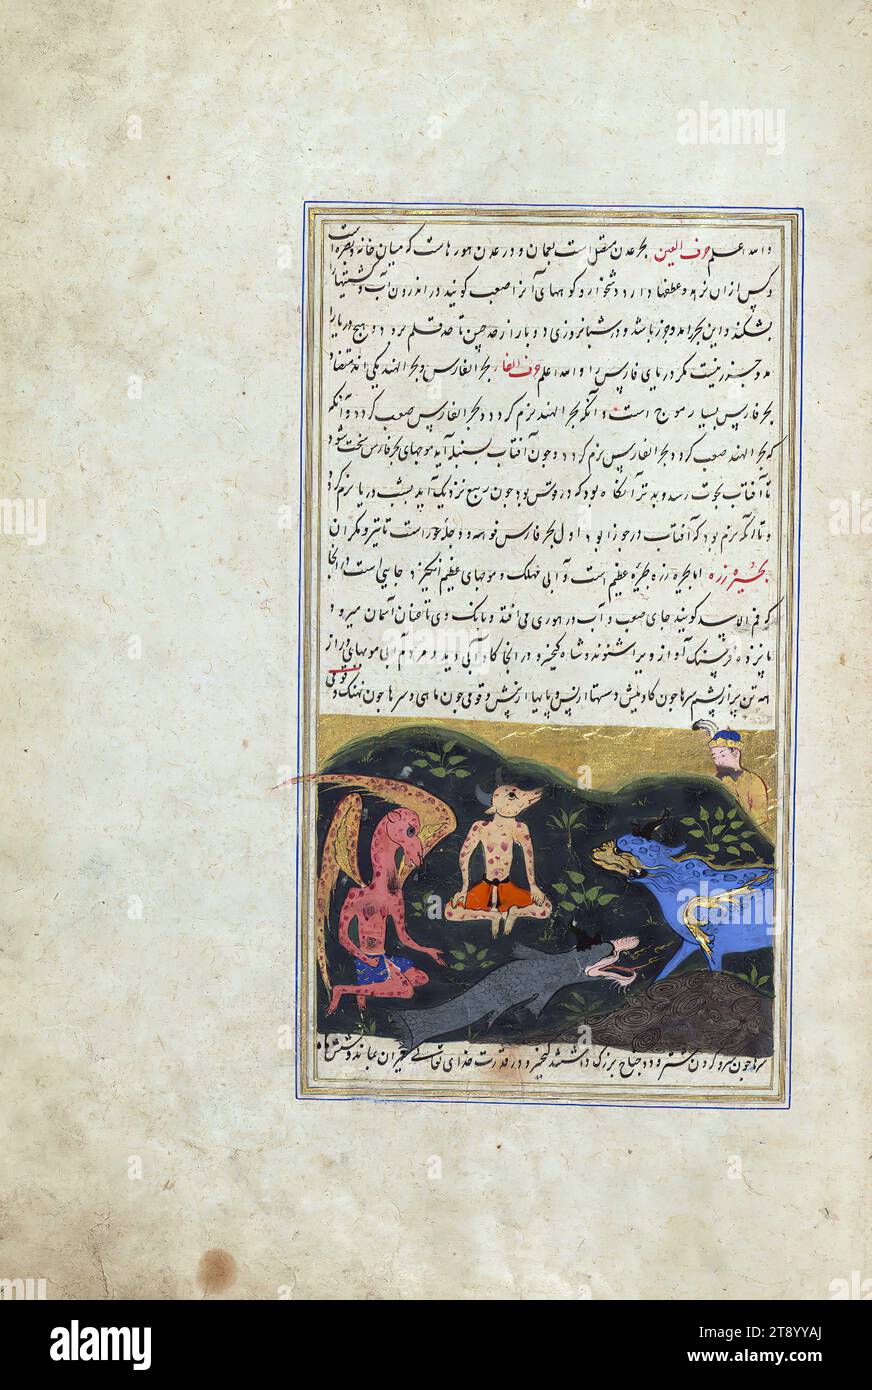 Wonders of creation, Kay Khusraw watches fabulous creatures in Lake Zarah, A Persian version of the famous 'Wonders of creation' (ʿAjā’ib al-makhlūqāt) by Zakariyāʾ al-Qazwīnī (d. 682 AH / 1283 CE). Composed by Shams al-Dīn Muḥammad al-Ṭūsī (fl. 6th century AH /12th CE), this manuscript, which may have been copied by an Iranian scribe, was illustrated with 181 miniatures (including a double-page map of the world) by several artists probably in Turkey in the 10th century AH / 16th CE Stock Photo